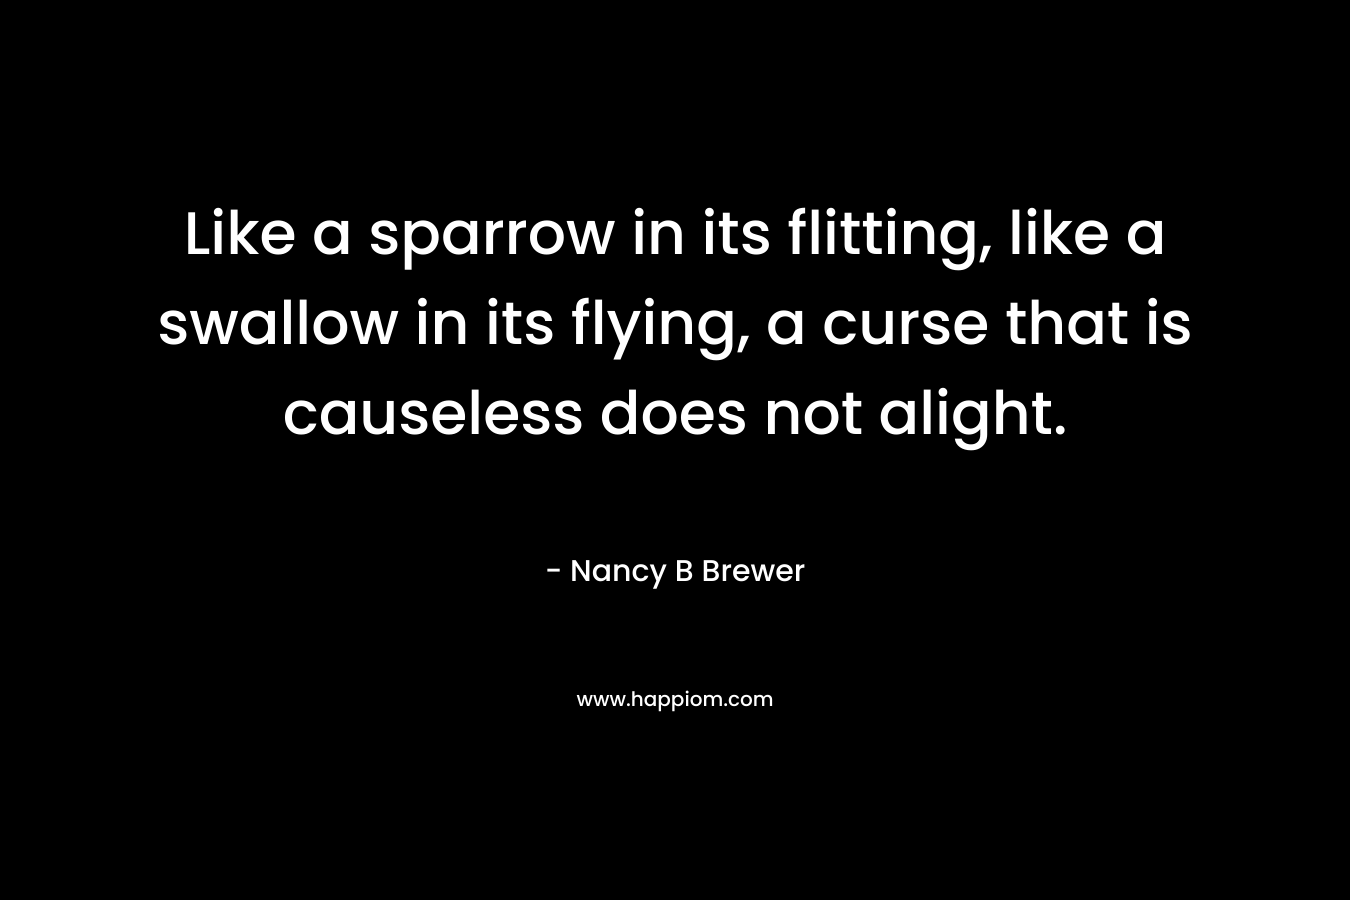 Like a sparrow in its flitting, like a swallow in its flying, a curse that is causeless does not alight.